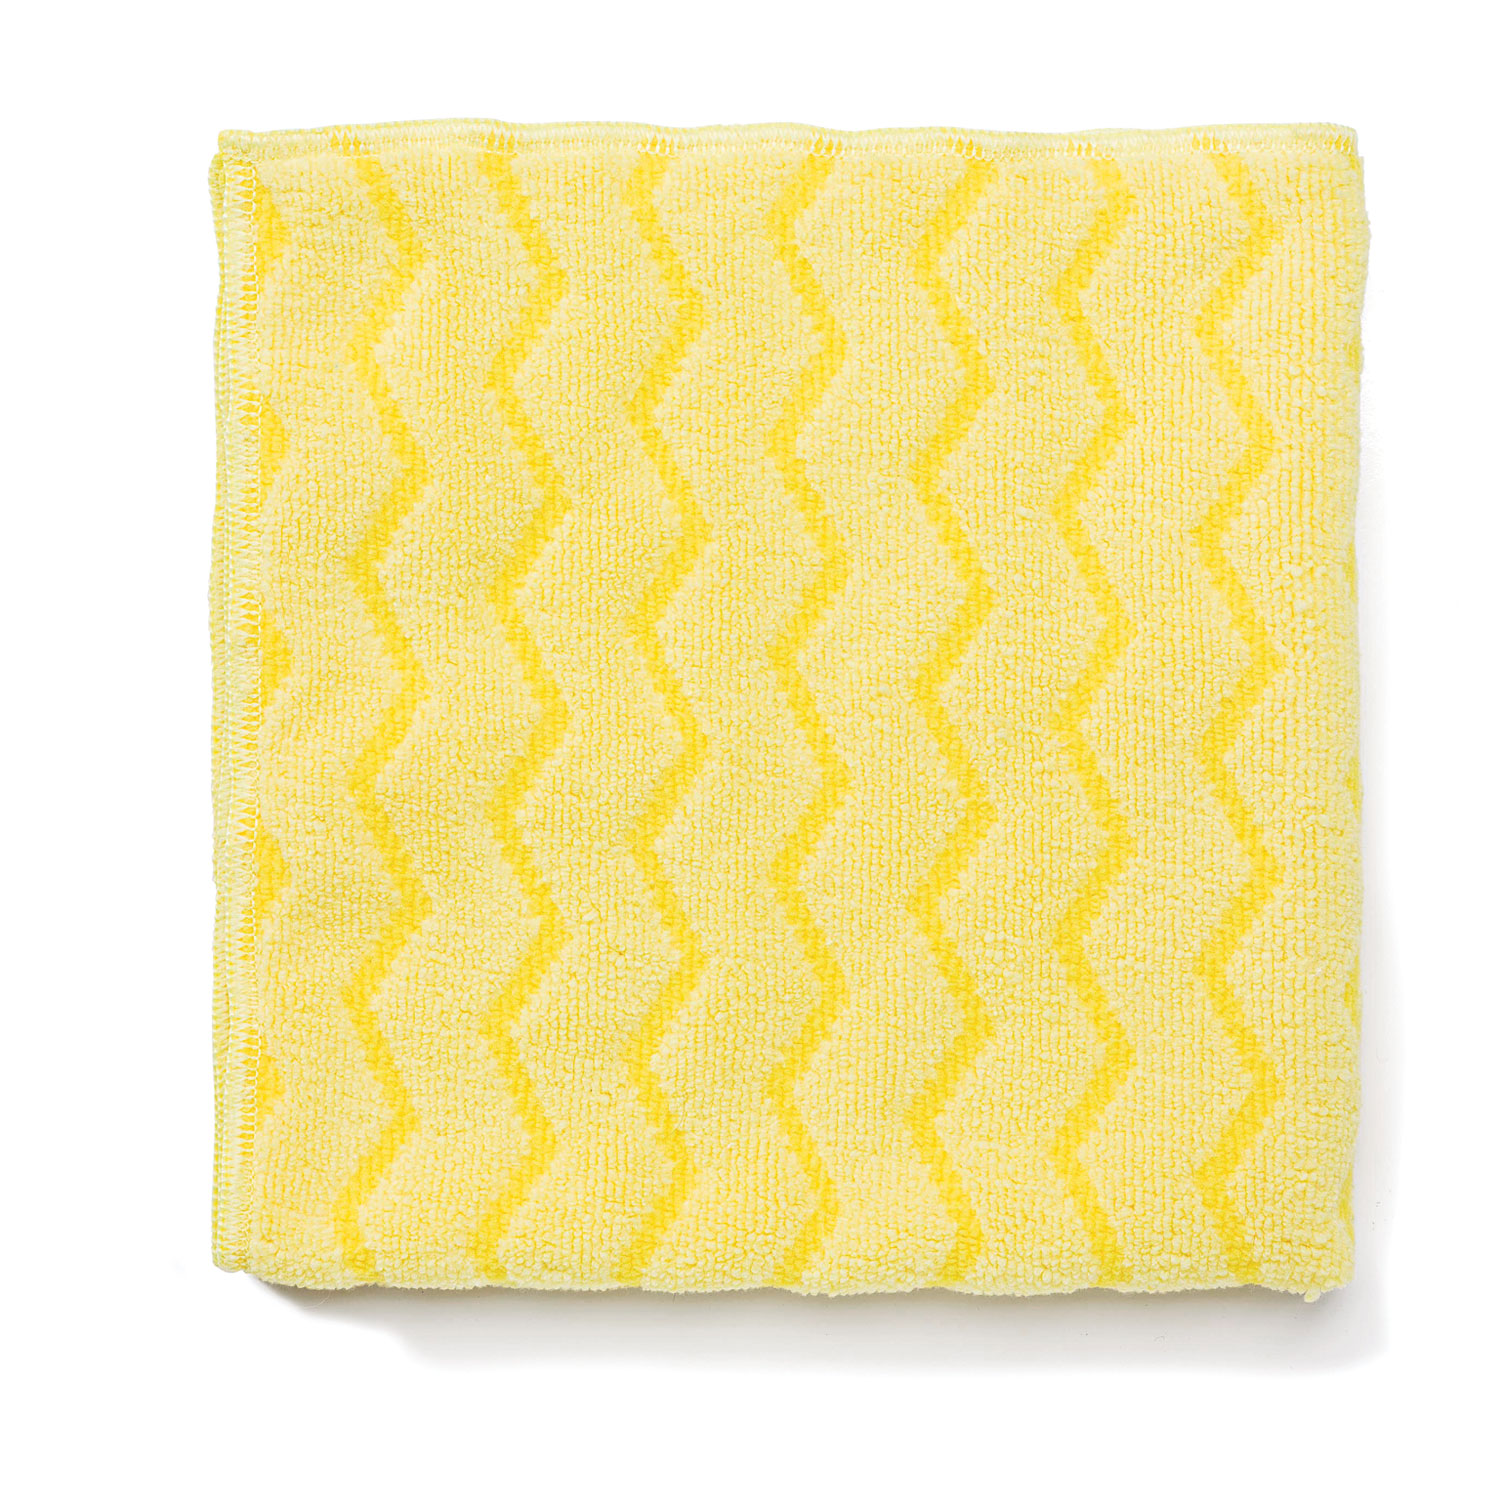  Rubbermaid Commercial FGQ61000YL00 Reusable Cleaning Cloths, Microfiber, 16 x 16, Yellow, 12/Carton (RCPQ610) 